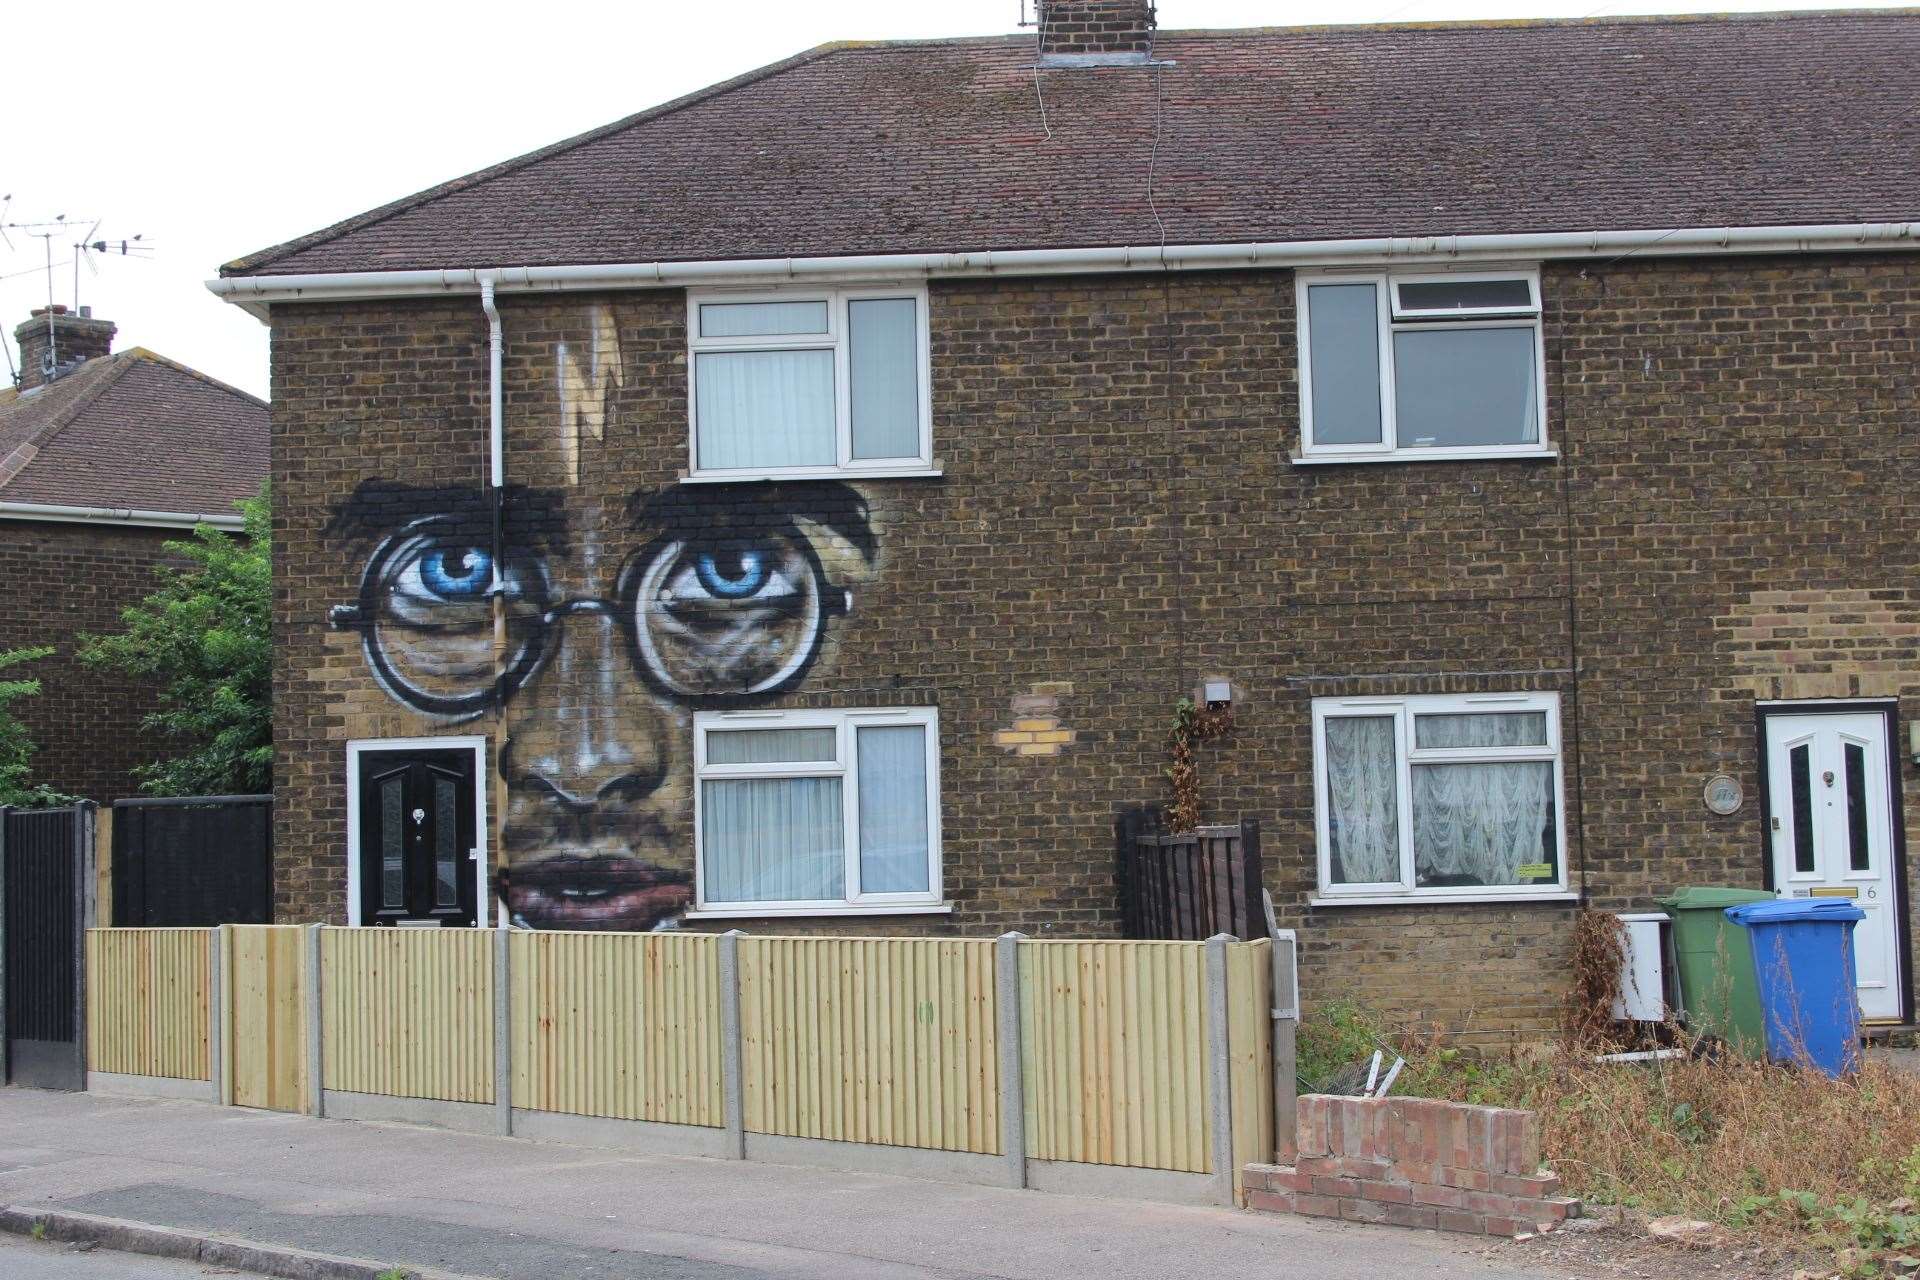 Denise Kerry's home in Medway Road, Sheerness, transformed into Harry Potter by muralist Jules "MuckRock" Muck